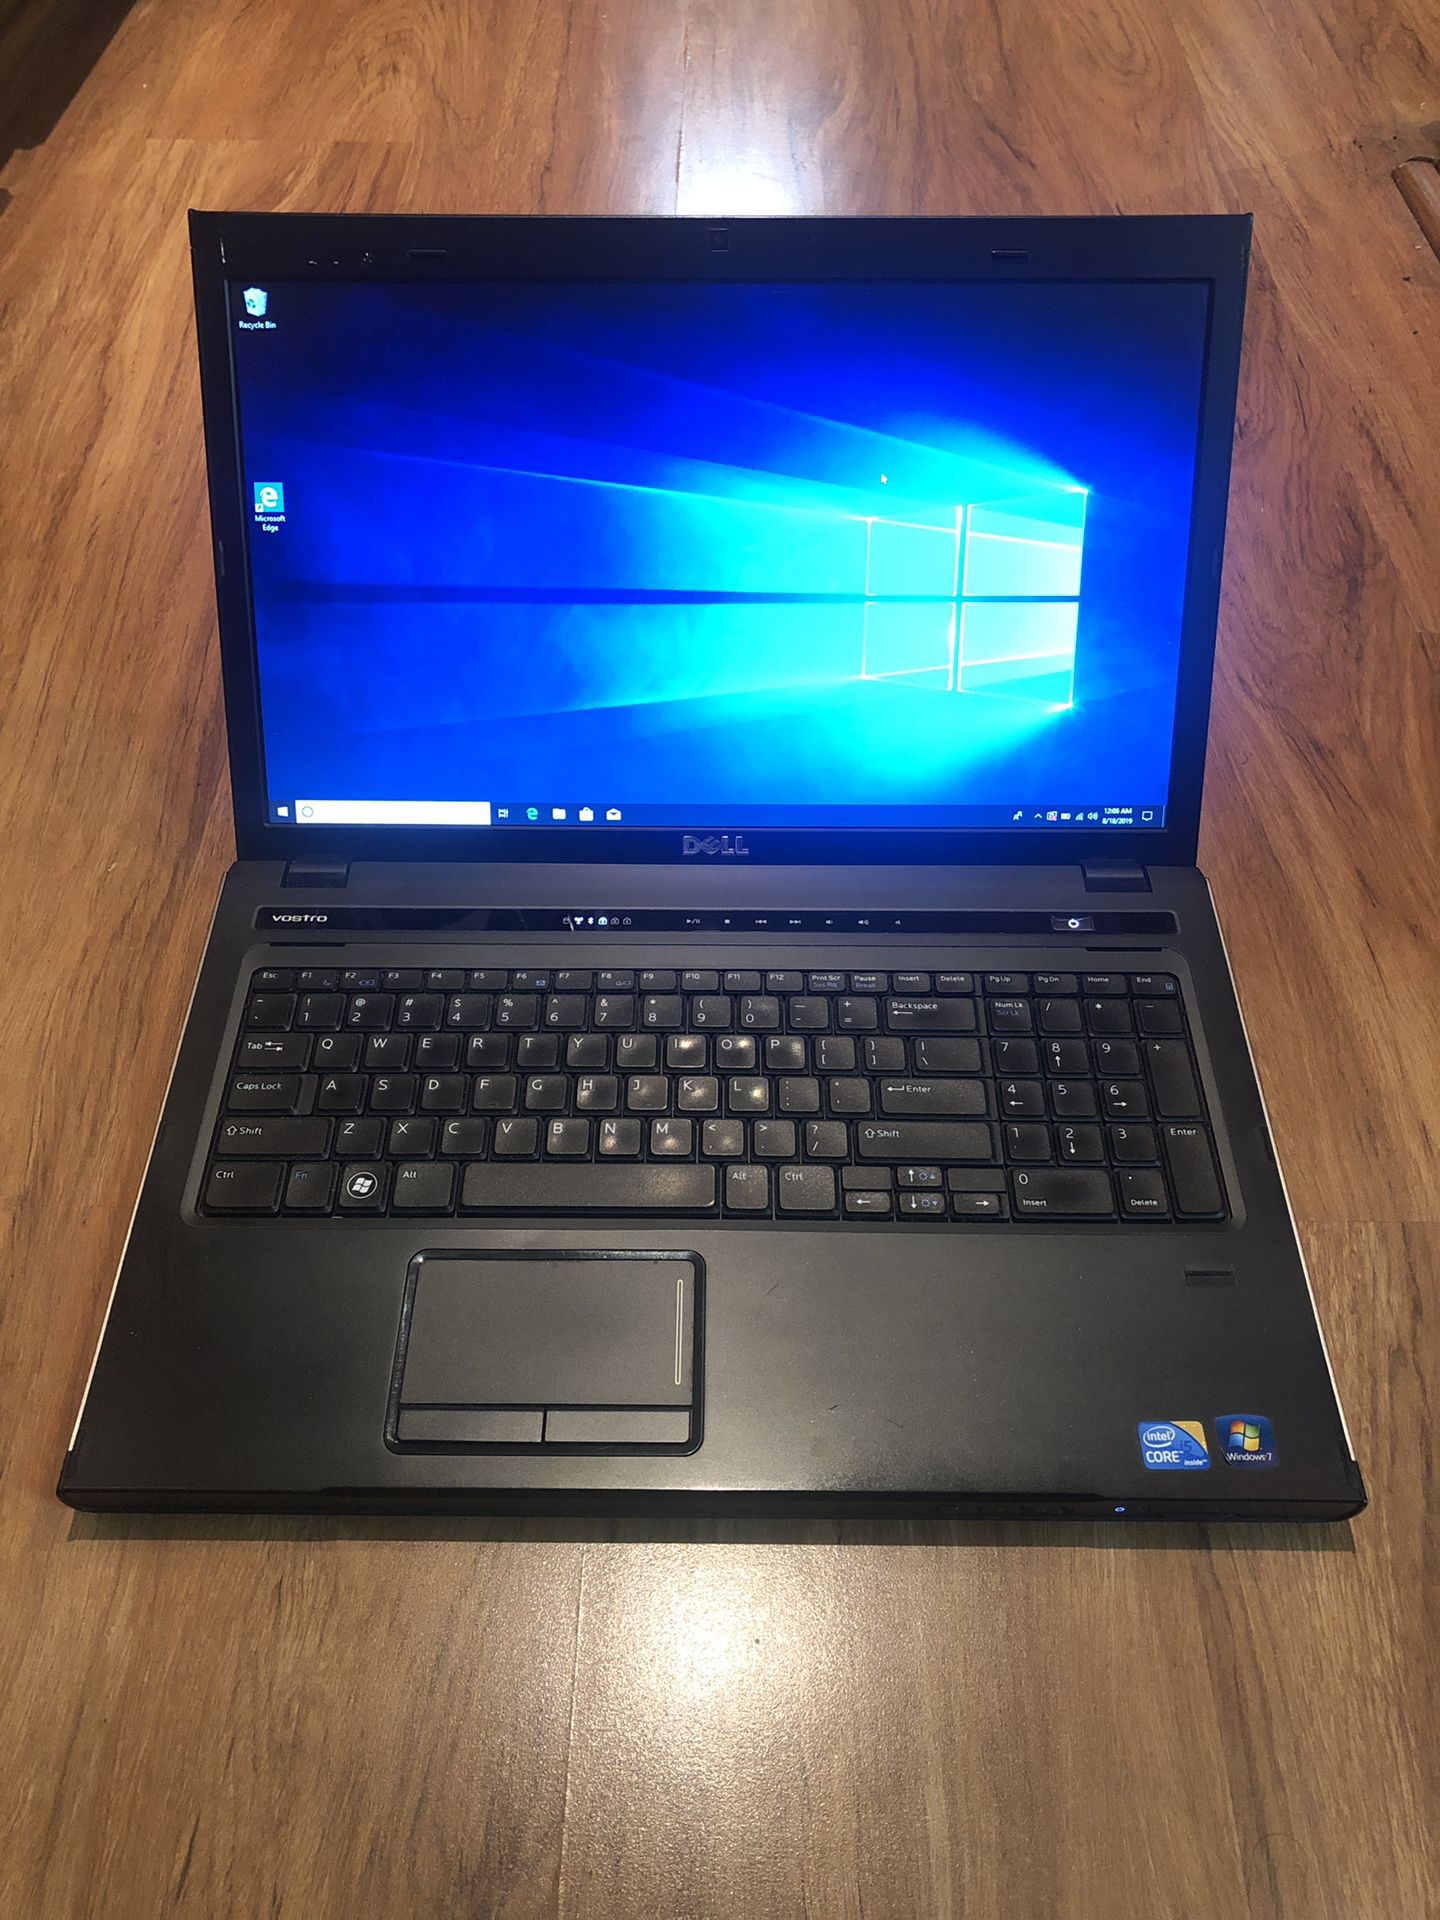 Dell Vostro 3700 core i5 4GB Ram 250GB Hard Drive 17.3 inch Windows 10 Pro Laptop with HDMI output & charger in Excellent Working condition!!!!!!!!